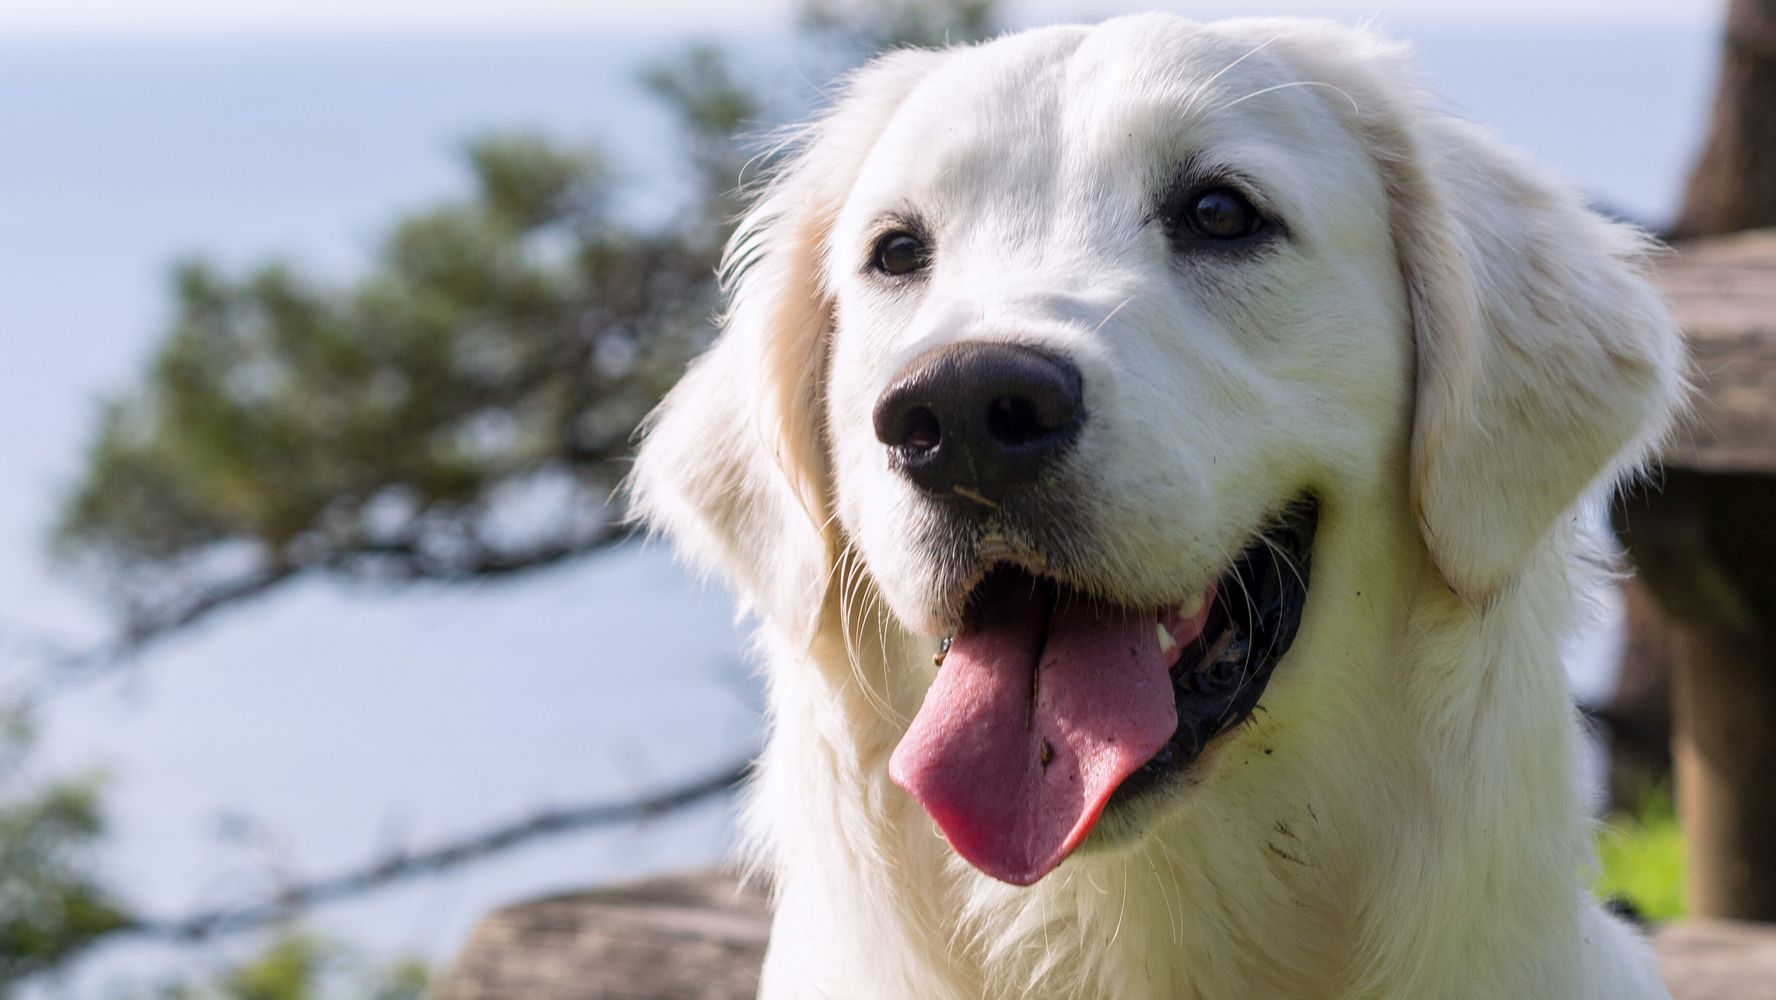 Canines&#039 Breeds Don&#039t Dictate Their Personalities, Review Finds